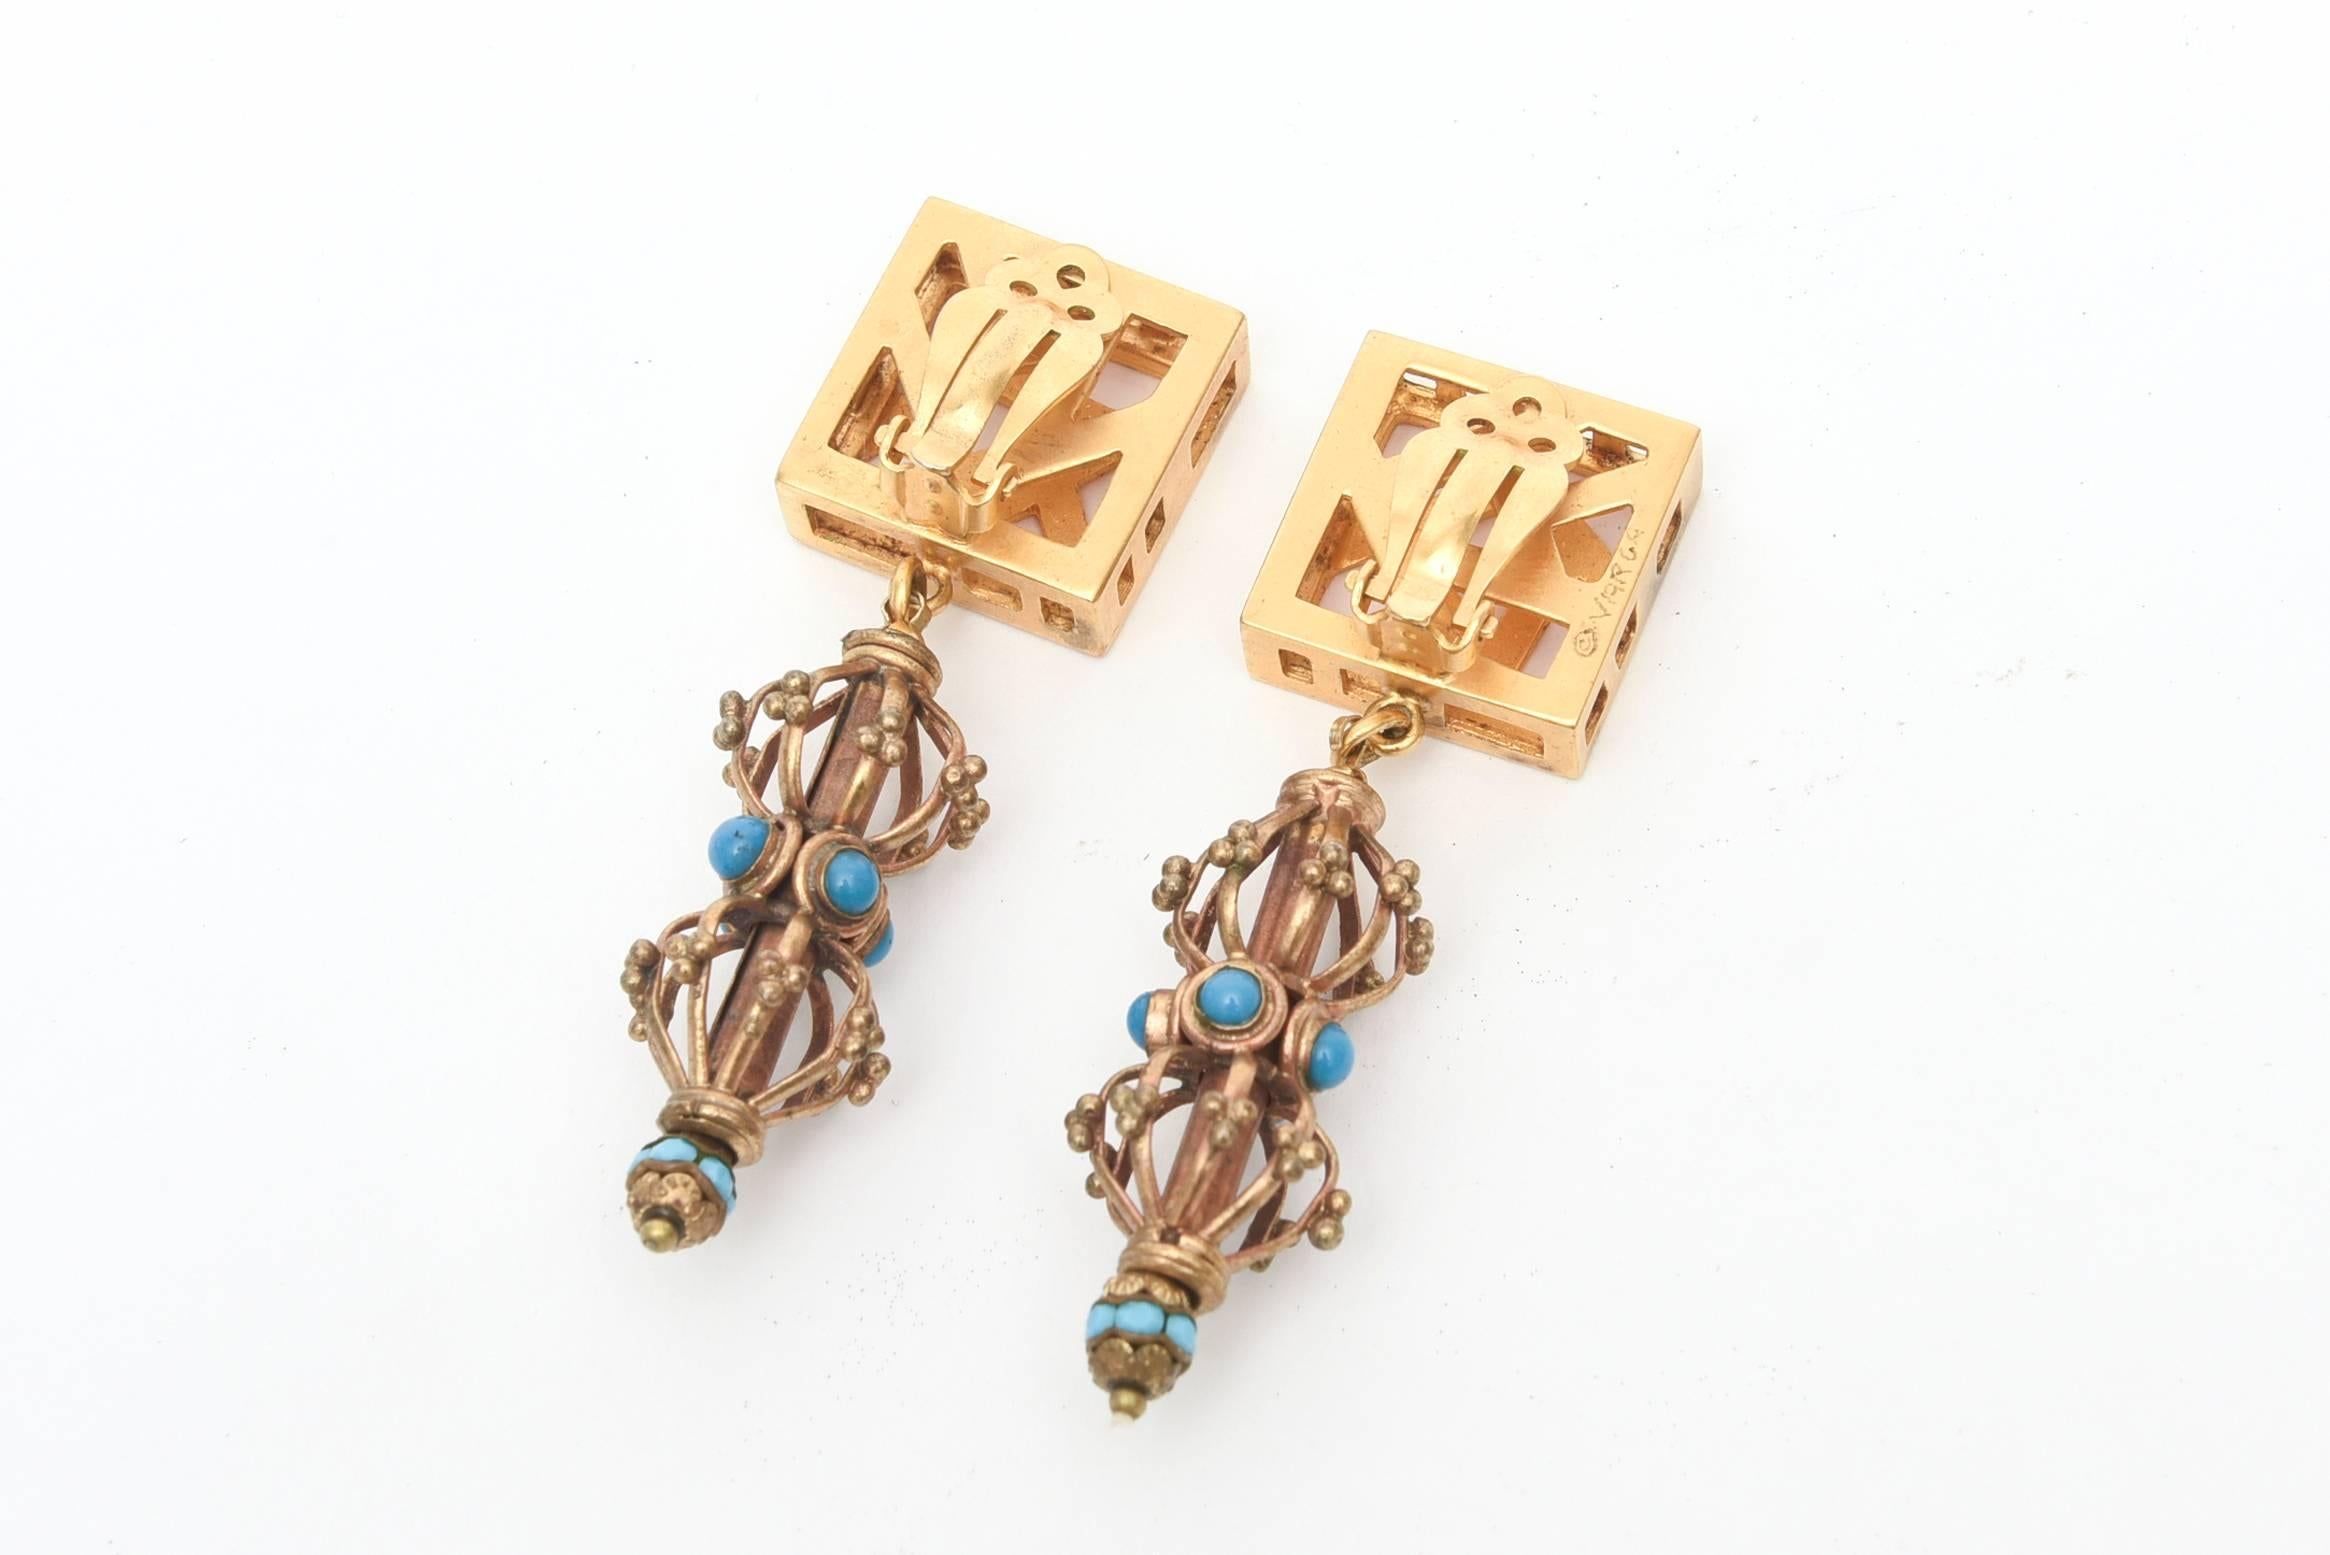 These unusual pair of clip on earrings have a number of great components going on. They are signed Varga . Gilt toned metal meets turquoise colored glass in the cage like form. They are sculptural and look great on! They look as if they were just